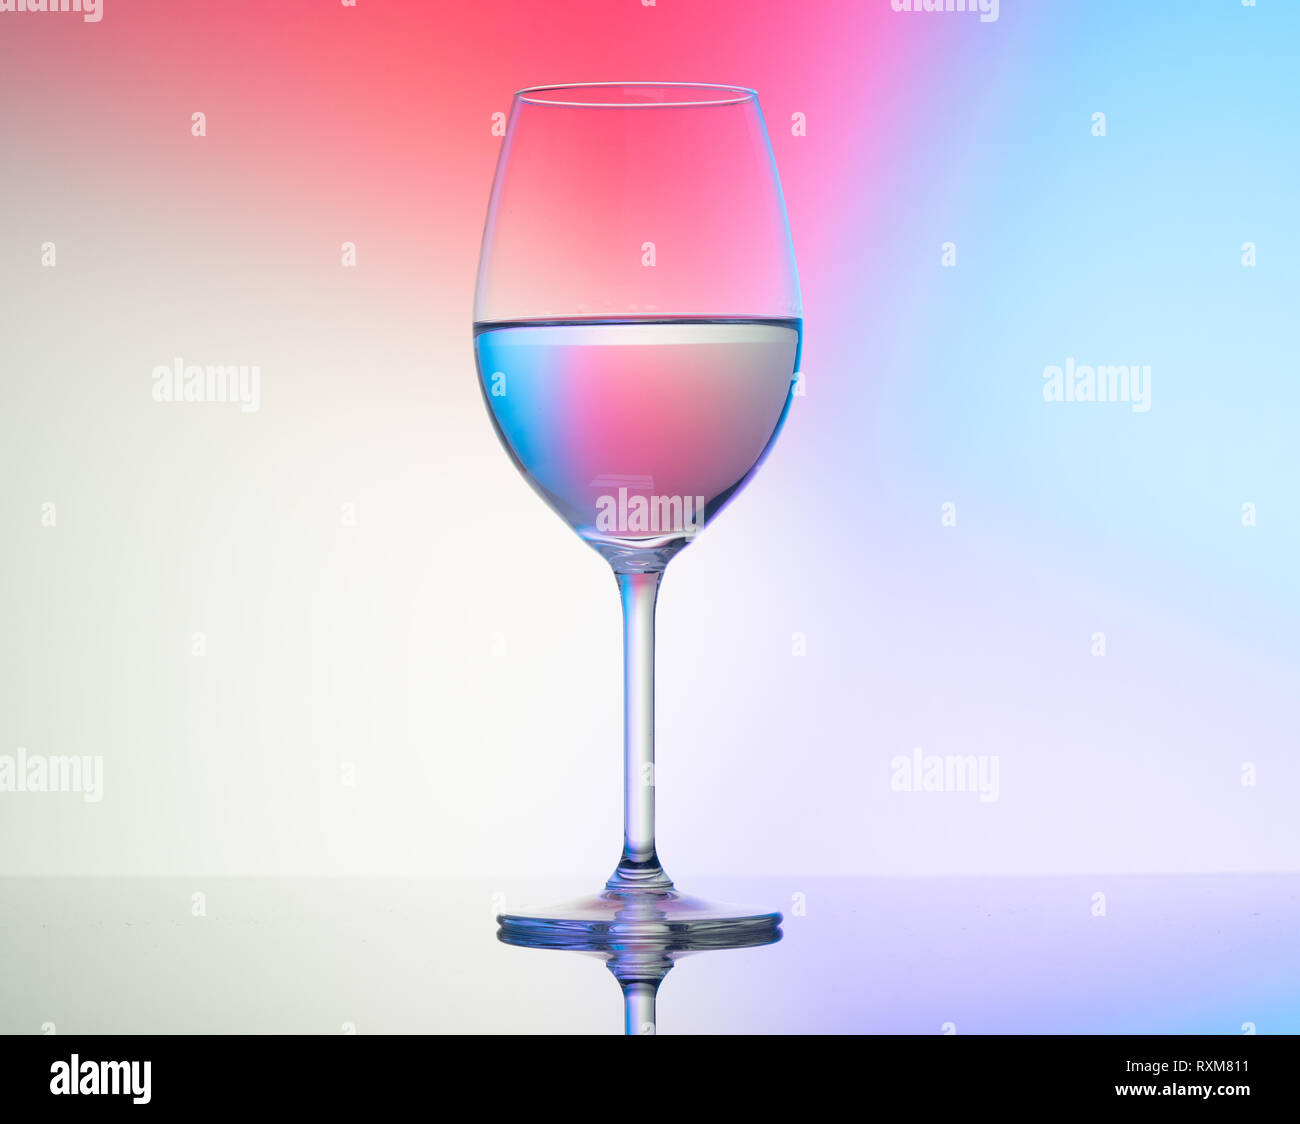 wine glasses dishes on a colored background Stock Photo